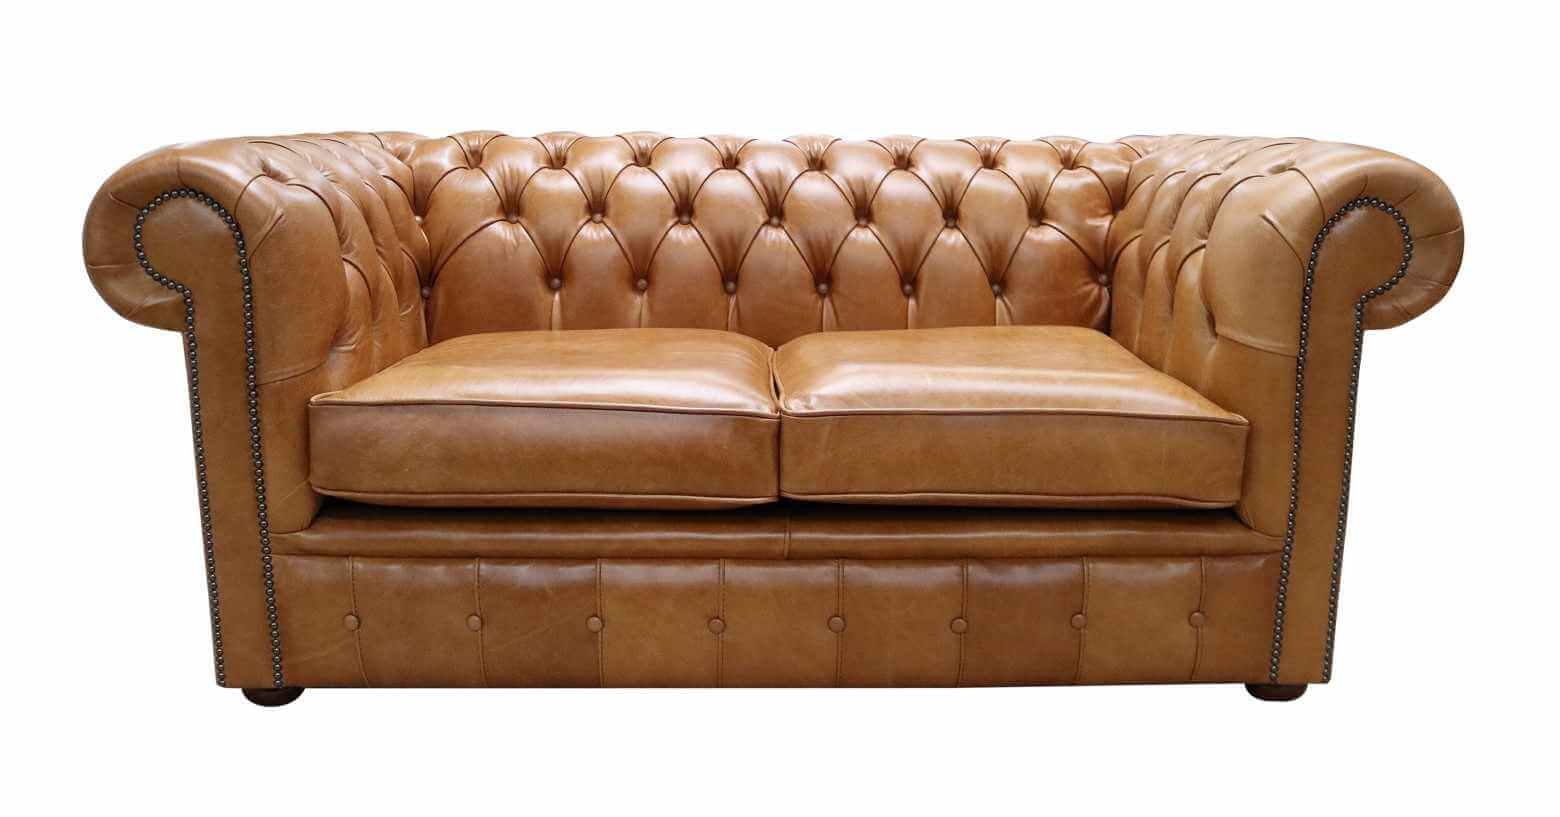 Comfort with Class Chesterfield Sofa Selections at Dunelm  %Post Title